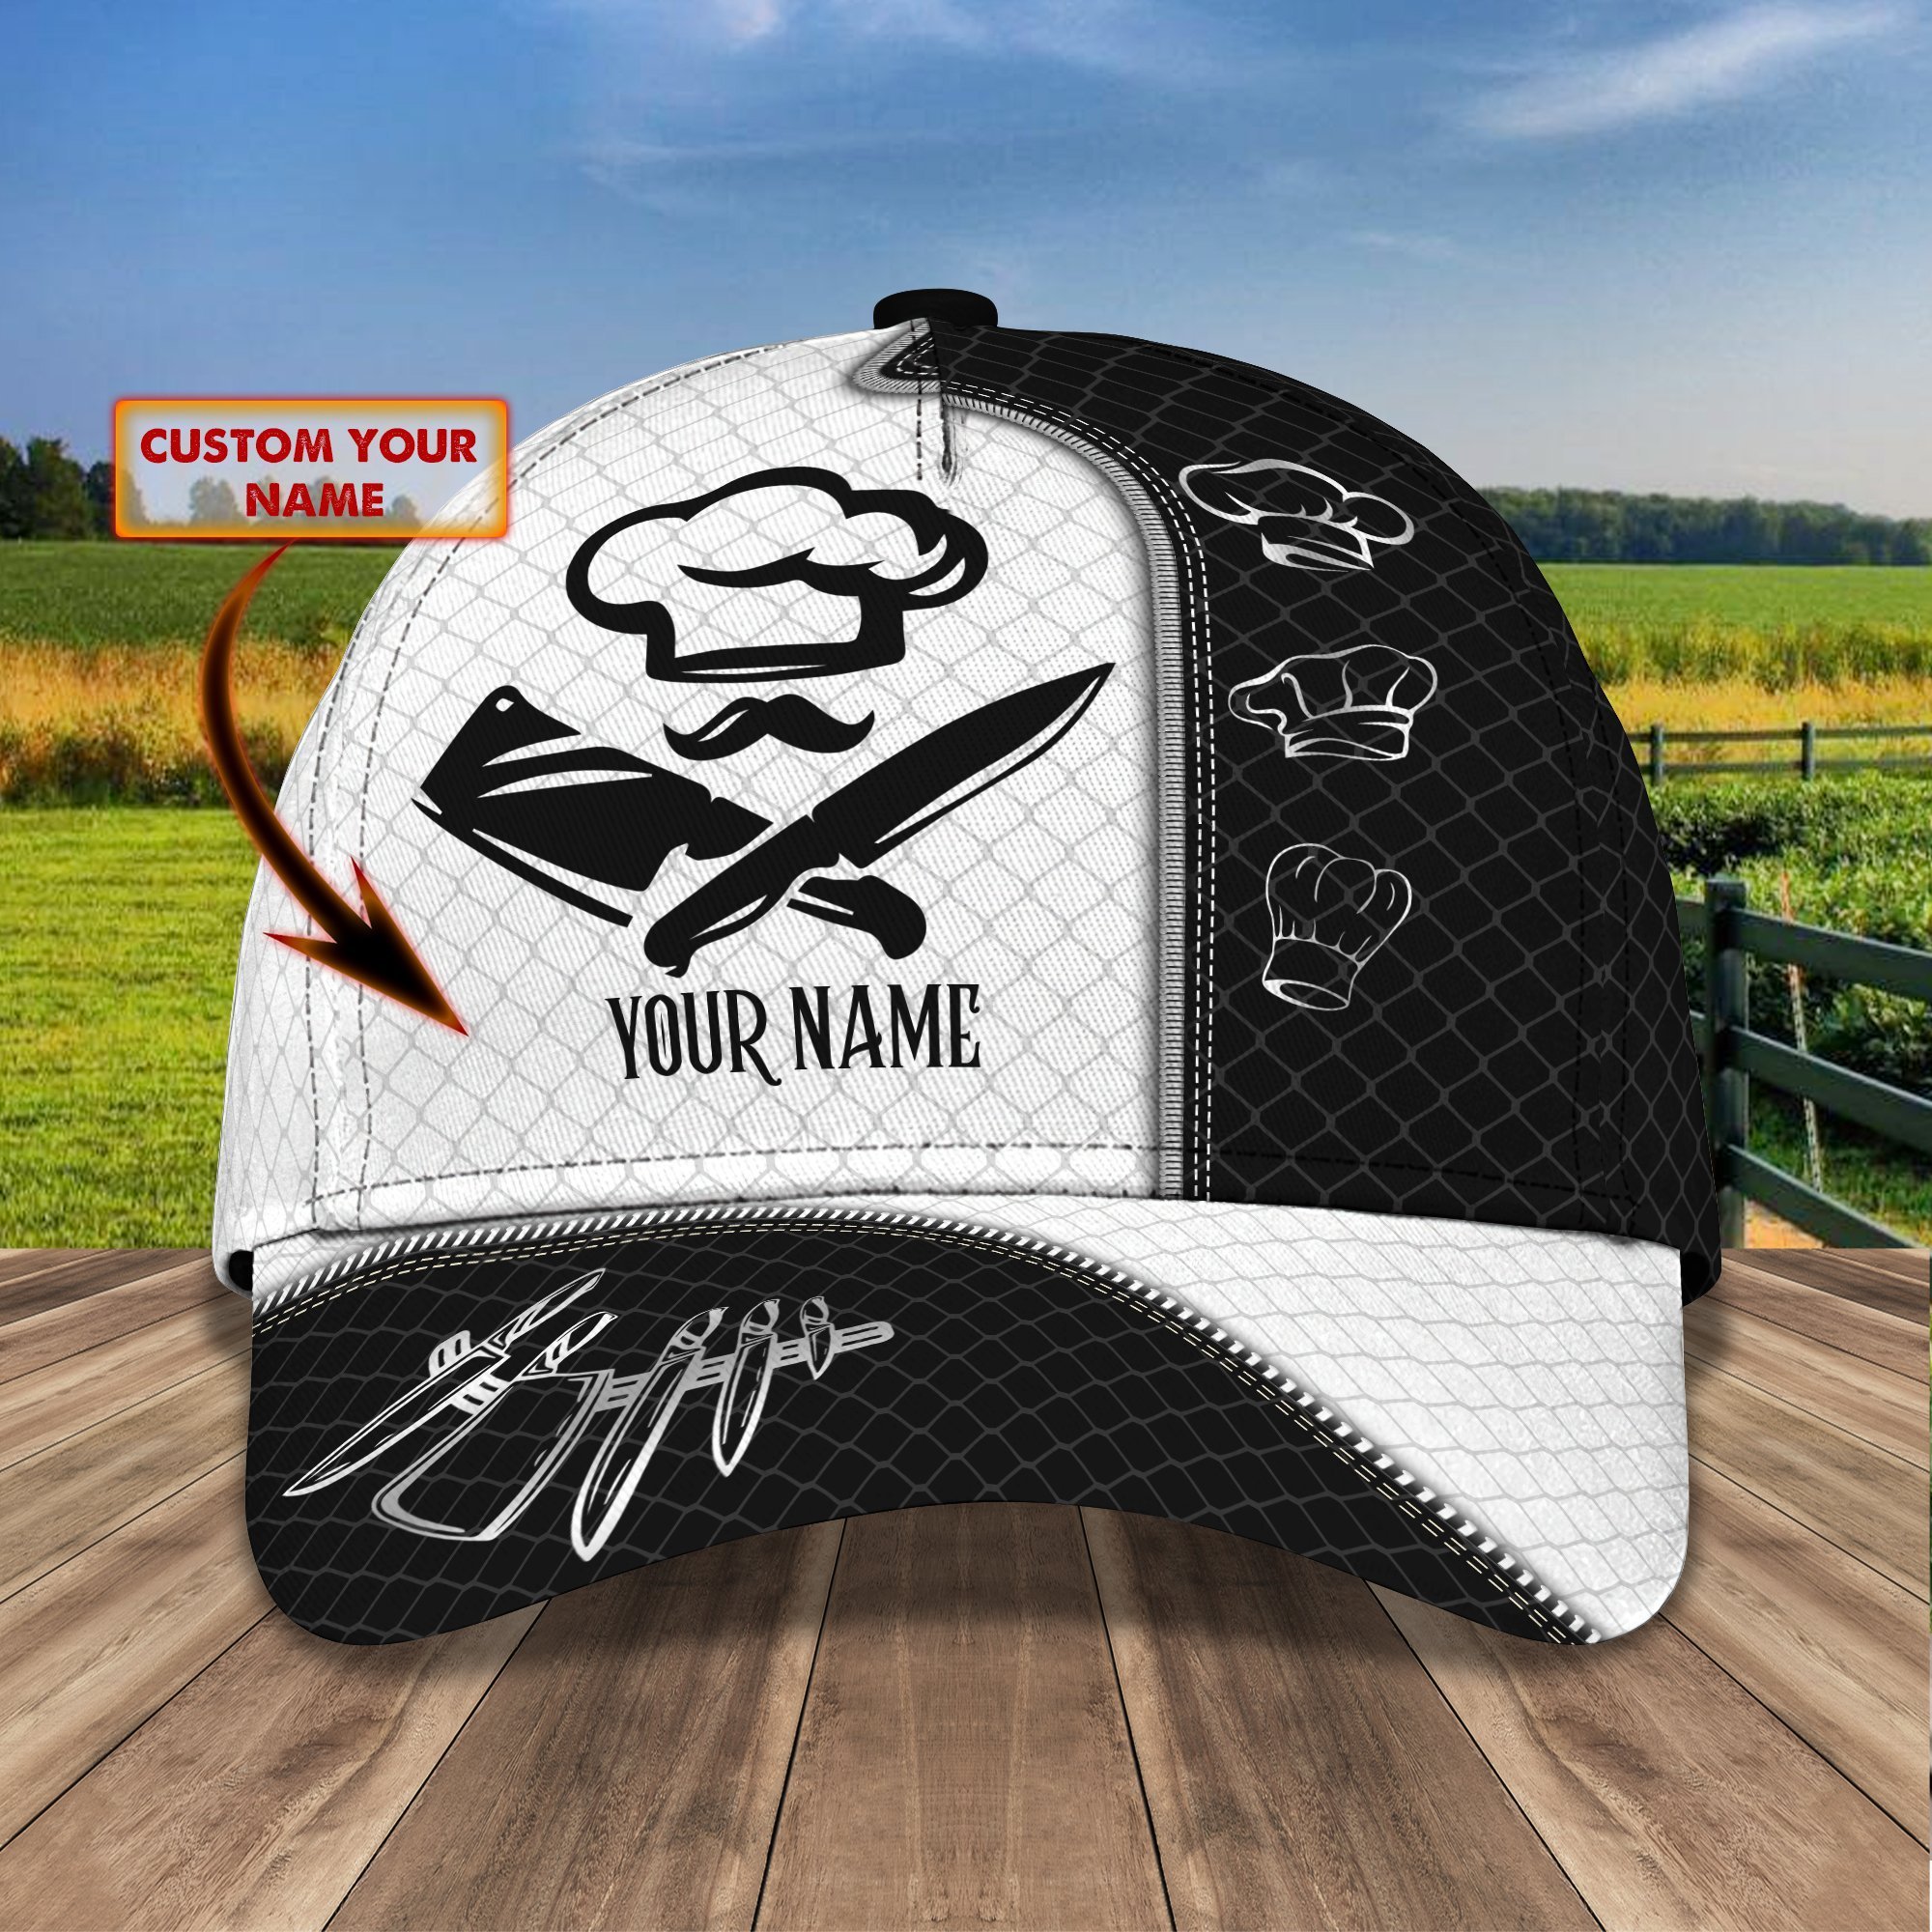 MASTER CHEF HAT WITH PERSONALIZED NAME 